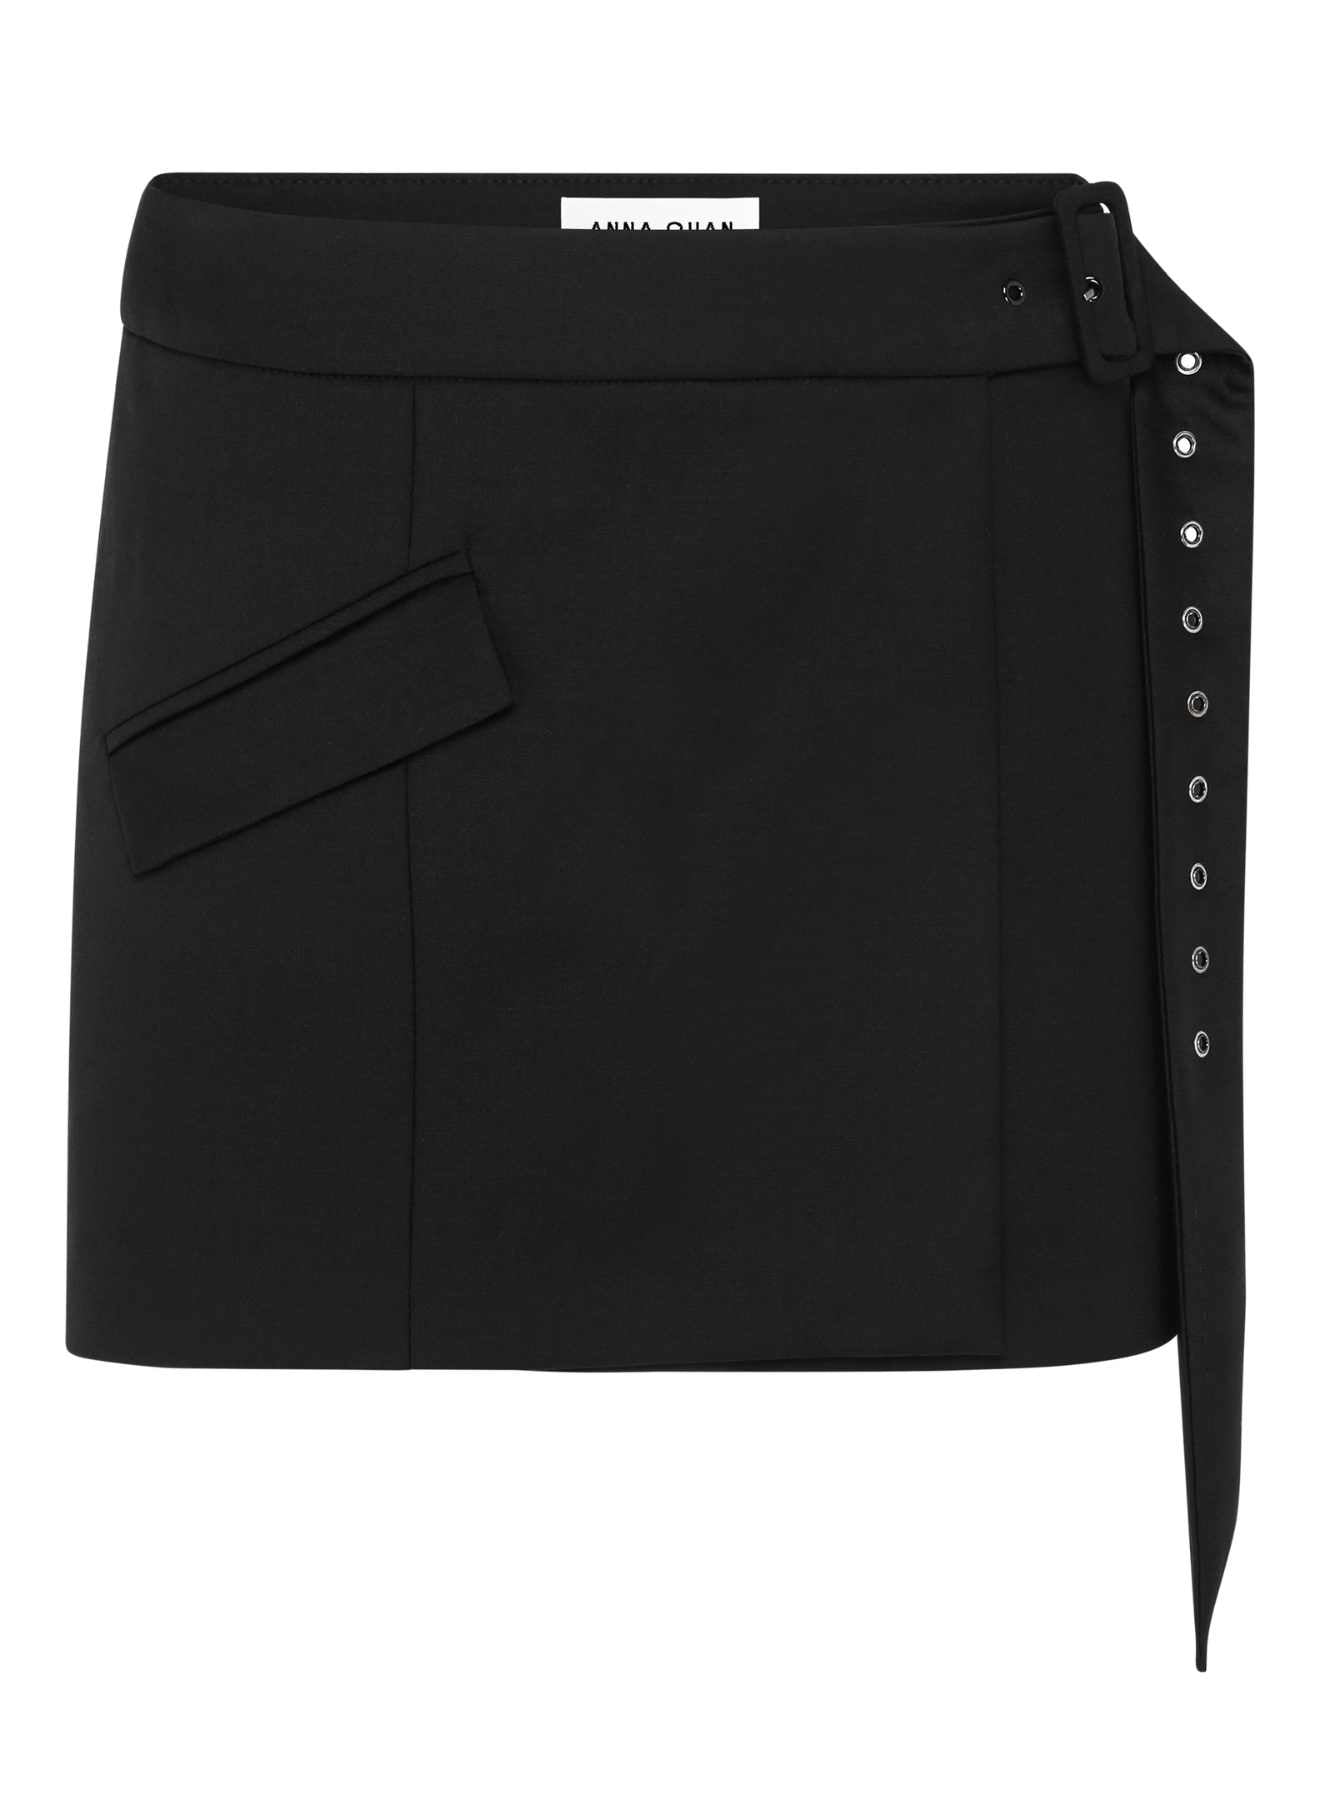 ANNA QUAN Pleat Wrap Mini Skirt. Designed for the fashion-forward, this skirt combines contemporary style with classic elegance. Embrace versatility with this wardrobe essential, perfect for both casual outings and dressed-up occasions. Black mini-skirt, black micro-mini-skirt, black work skirt, wool mini skirt, pleated short skirt, pleated mini skirt.